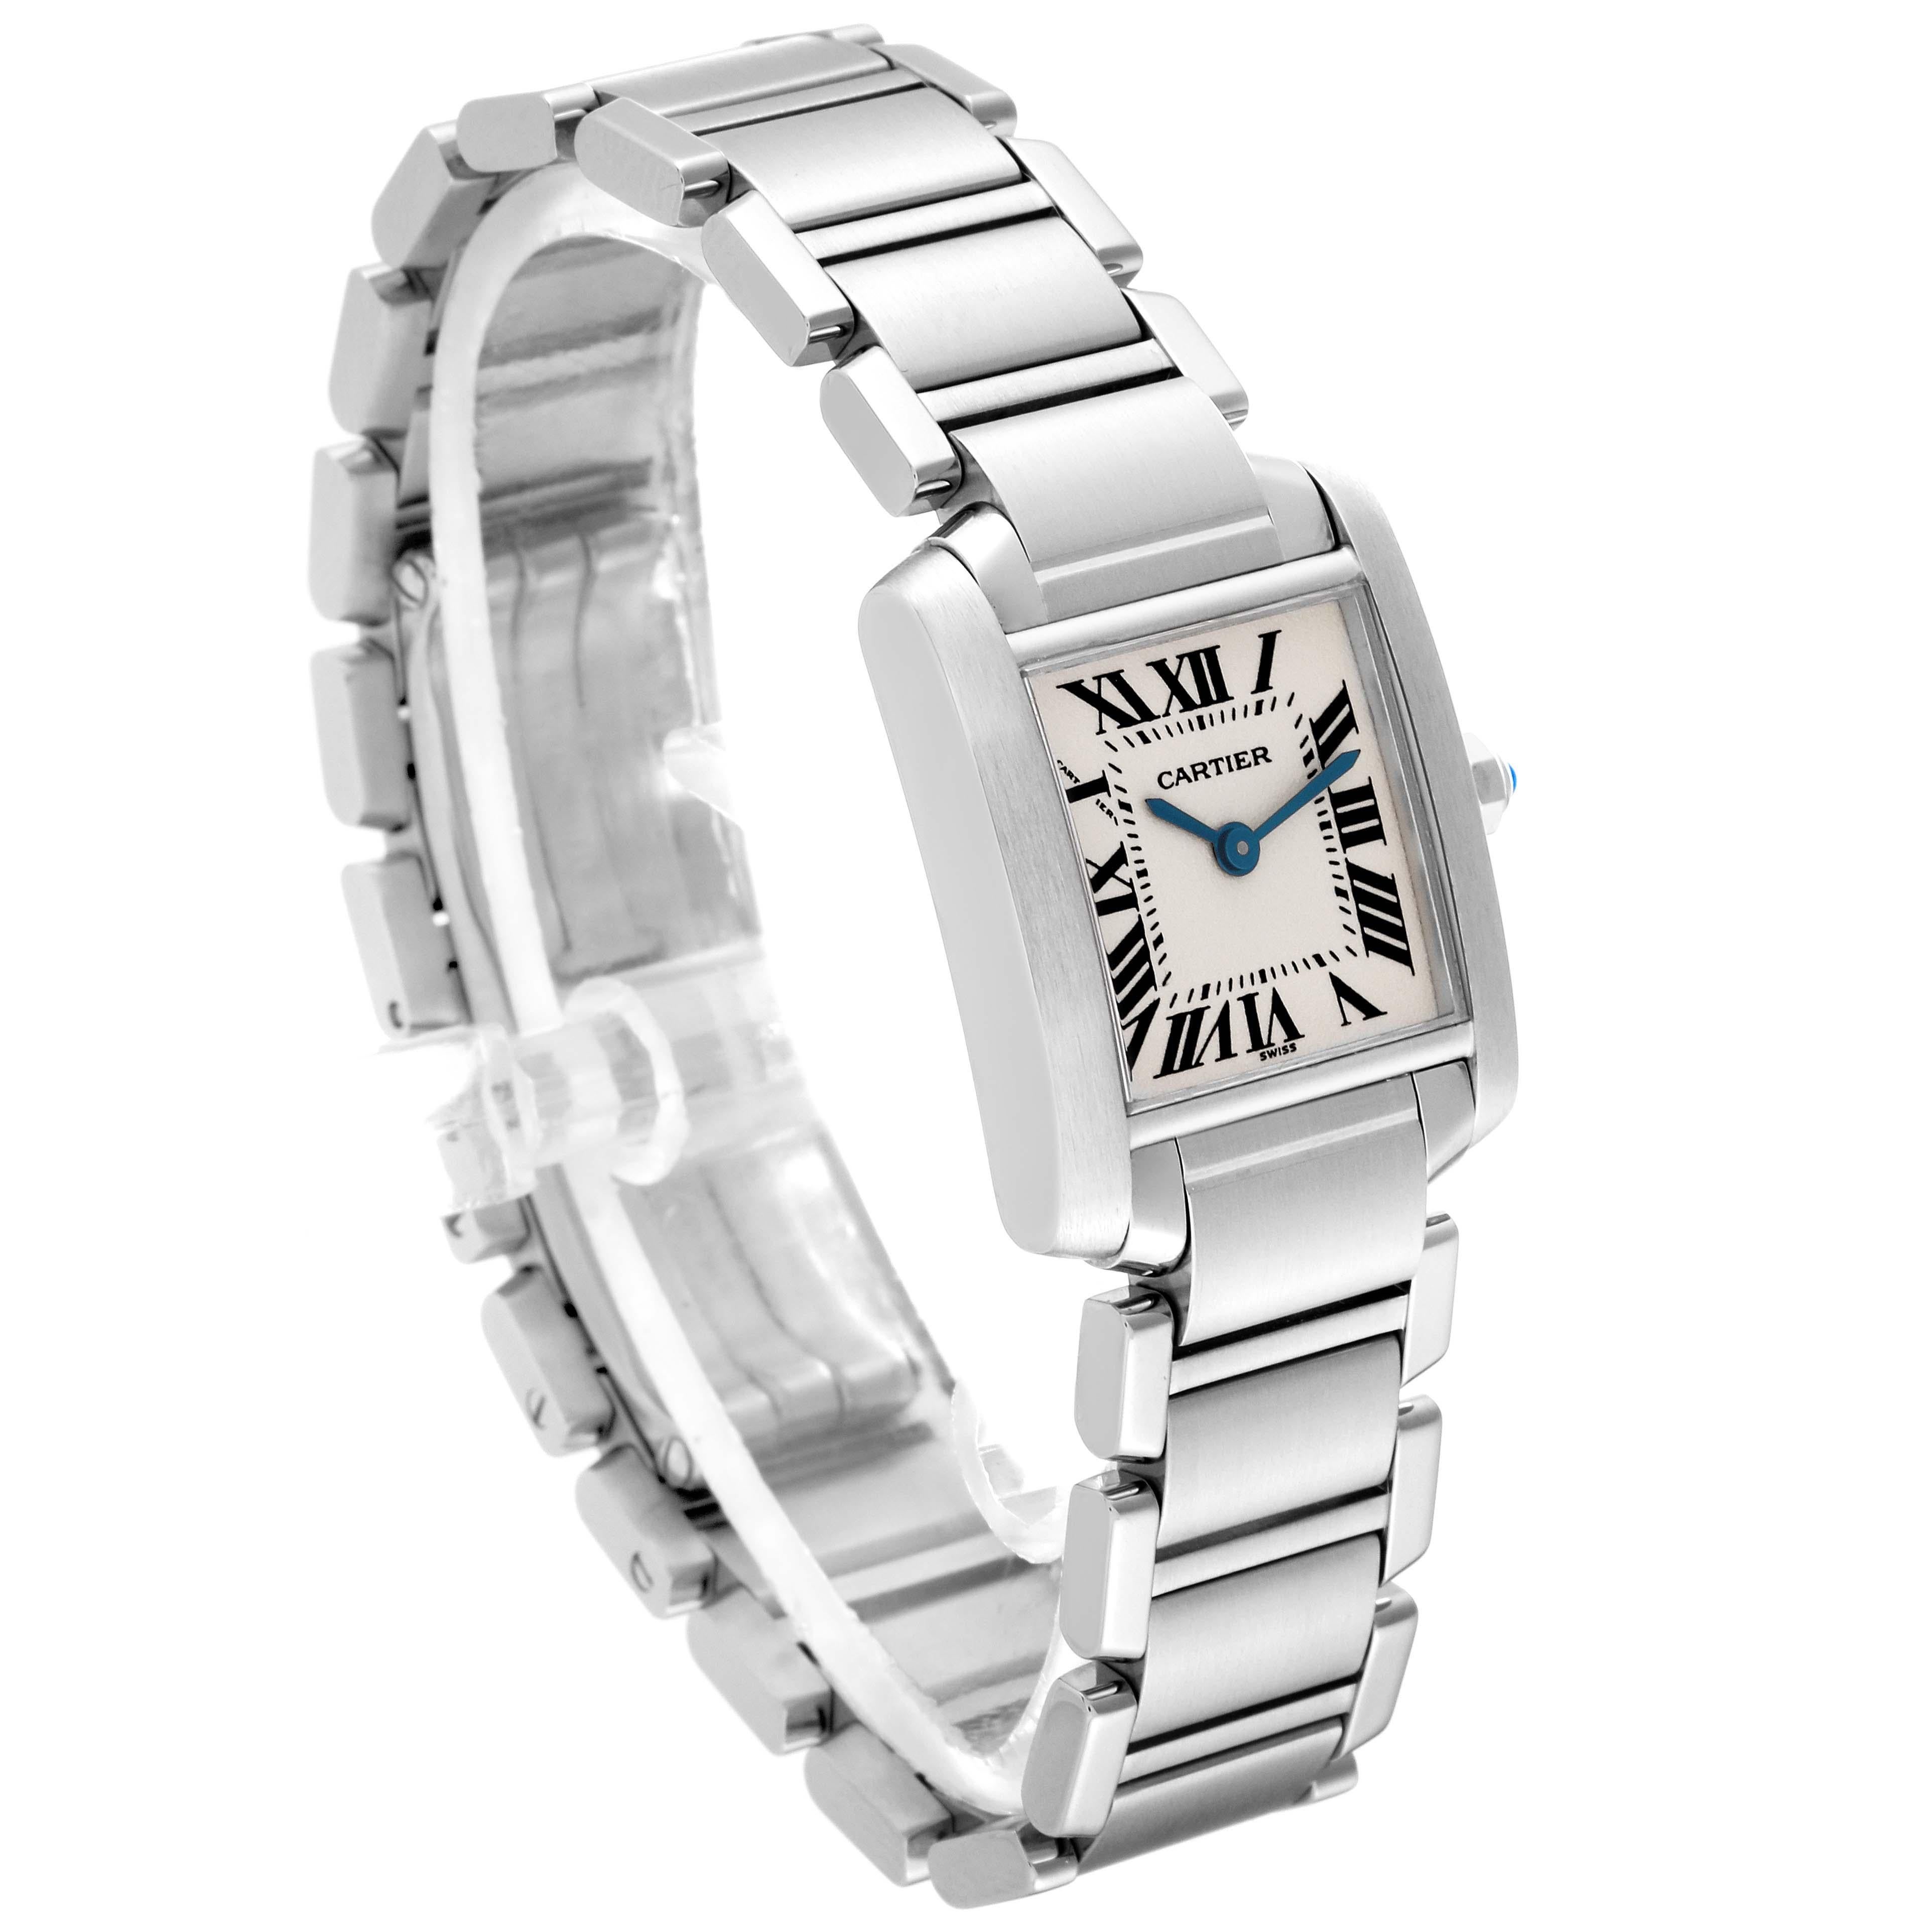 Cartier Tank Francaise Small Silver Dial Steel Ladies Watch W51008Q3 Box Papers en vente 1